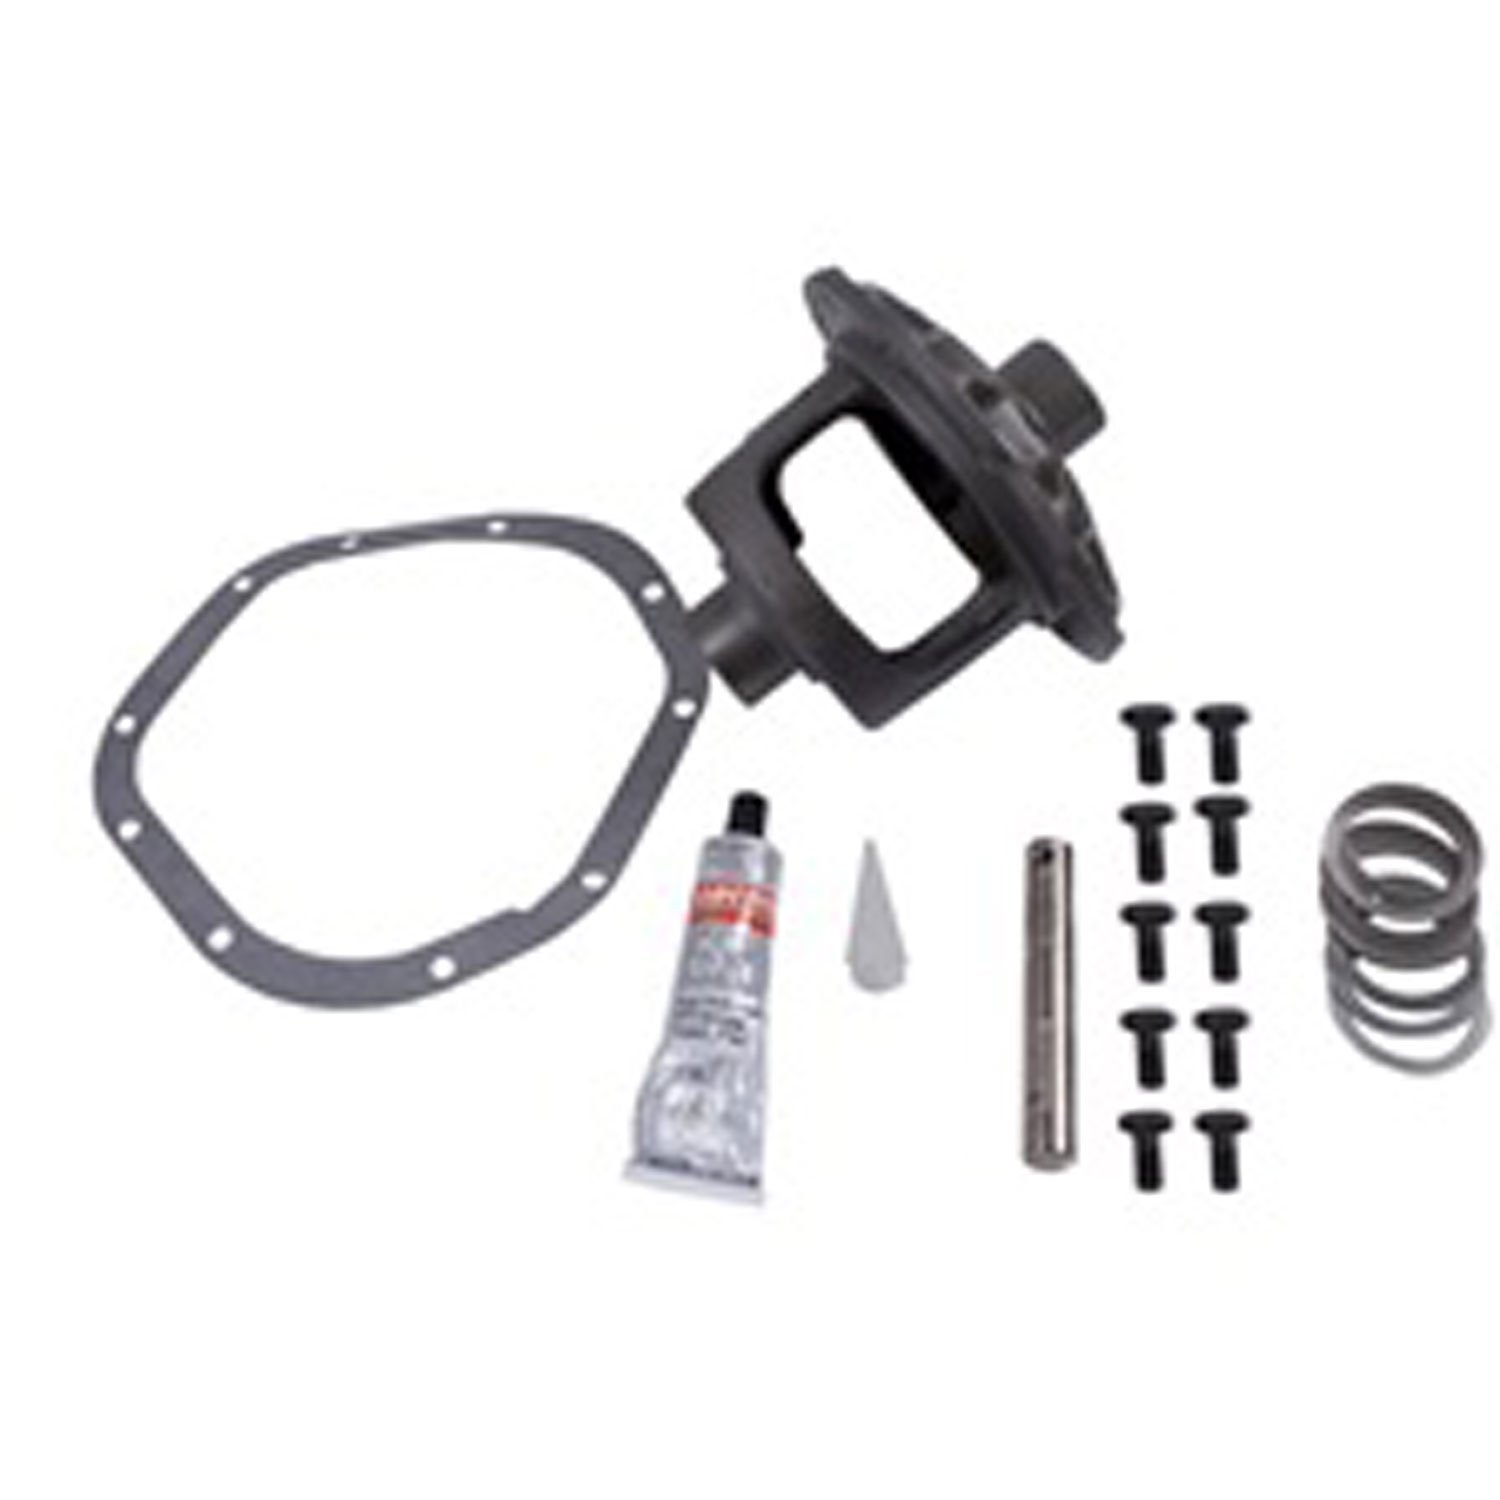 This differential carrier kit from Omix-ADA fits 70-06